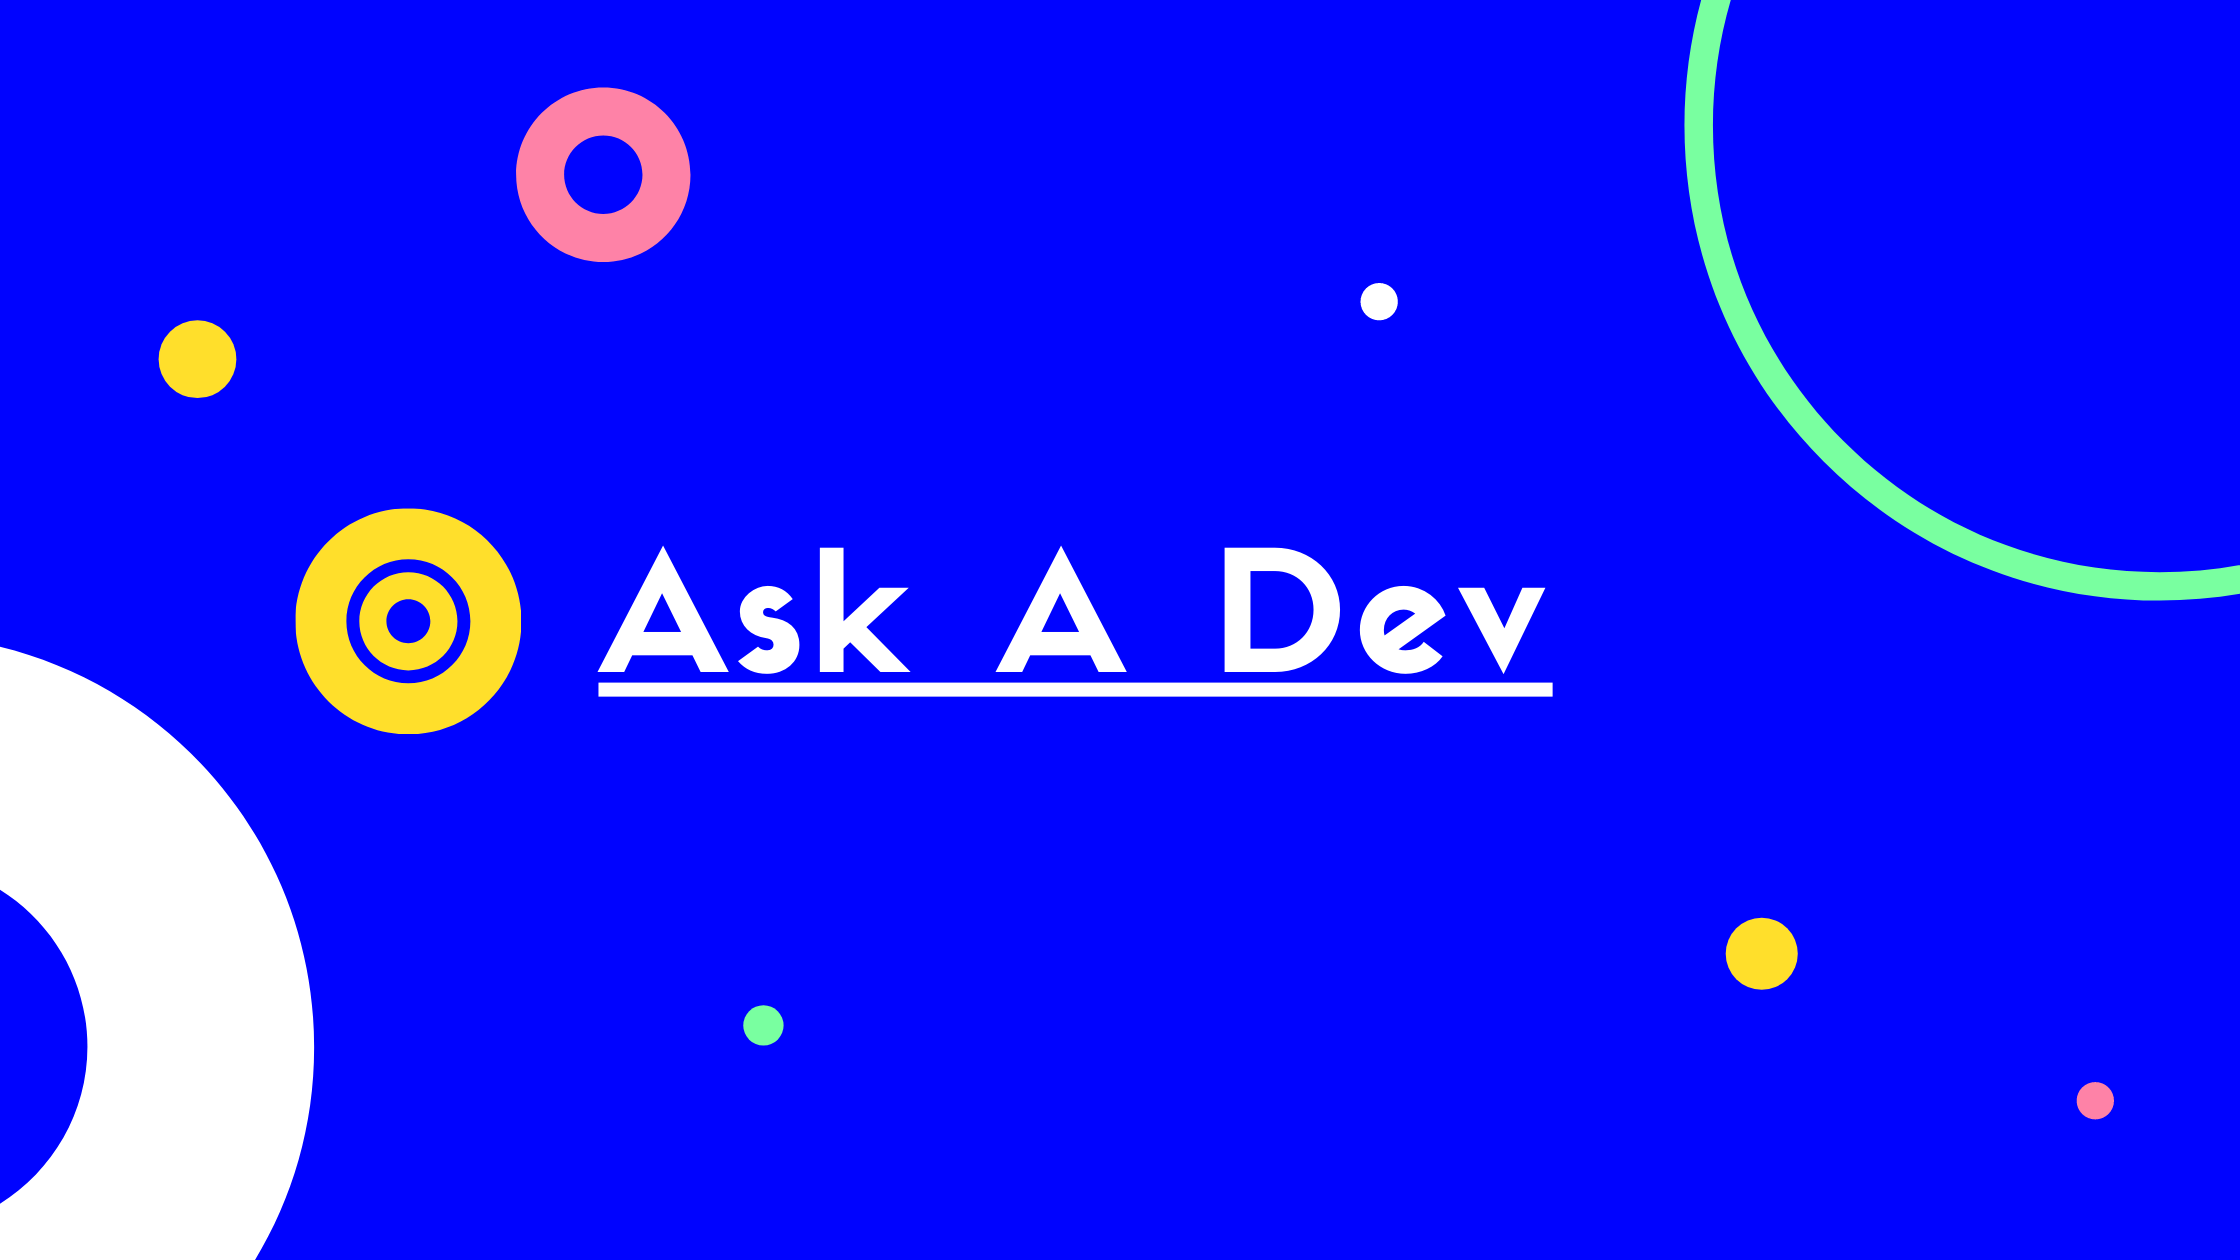 Image of the Ask A Dev